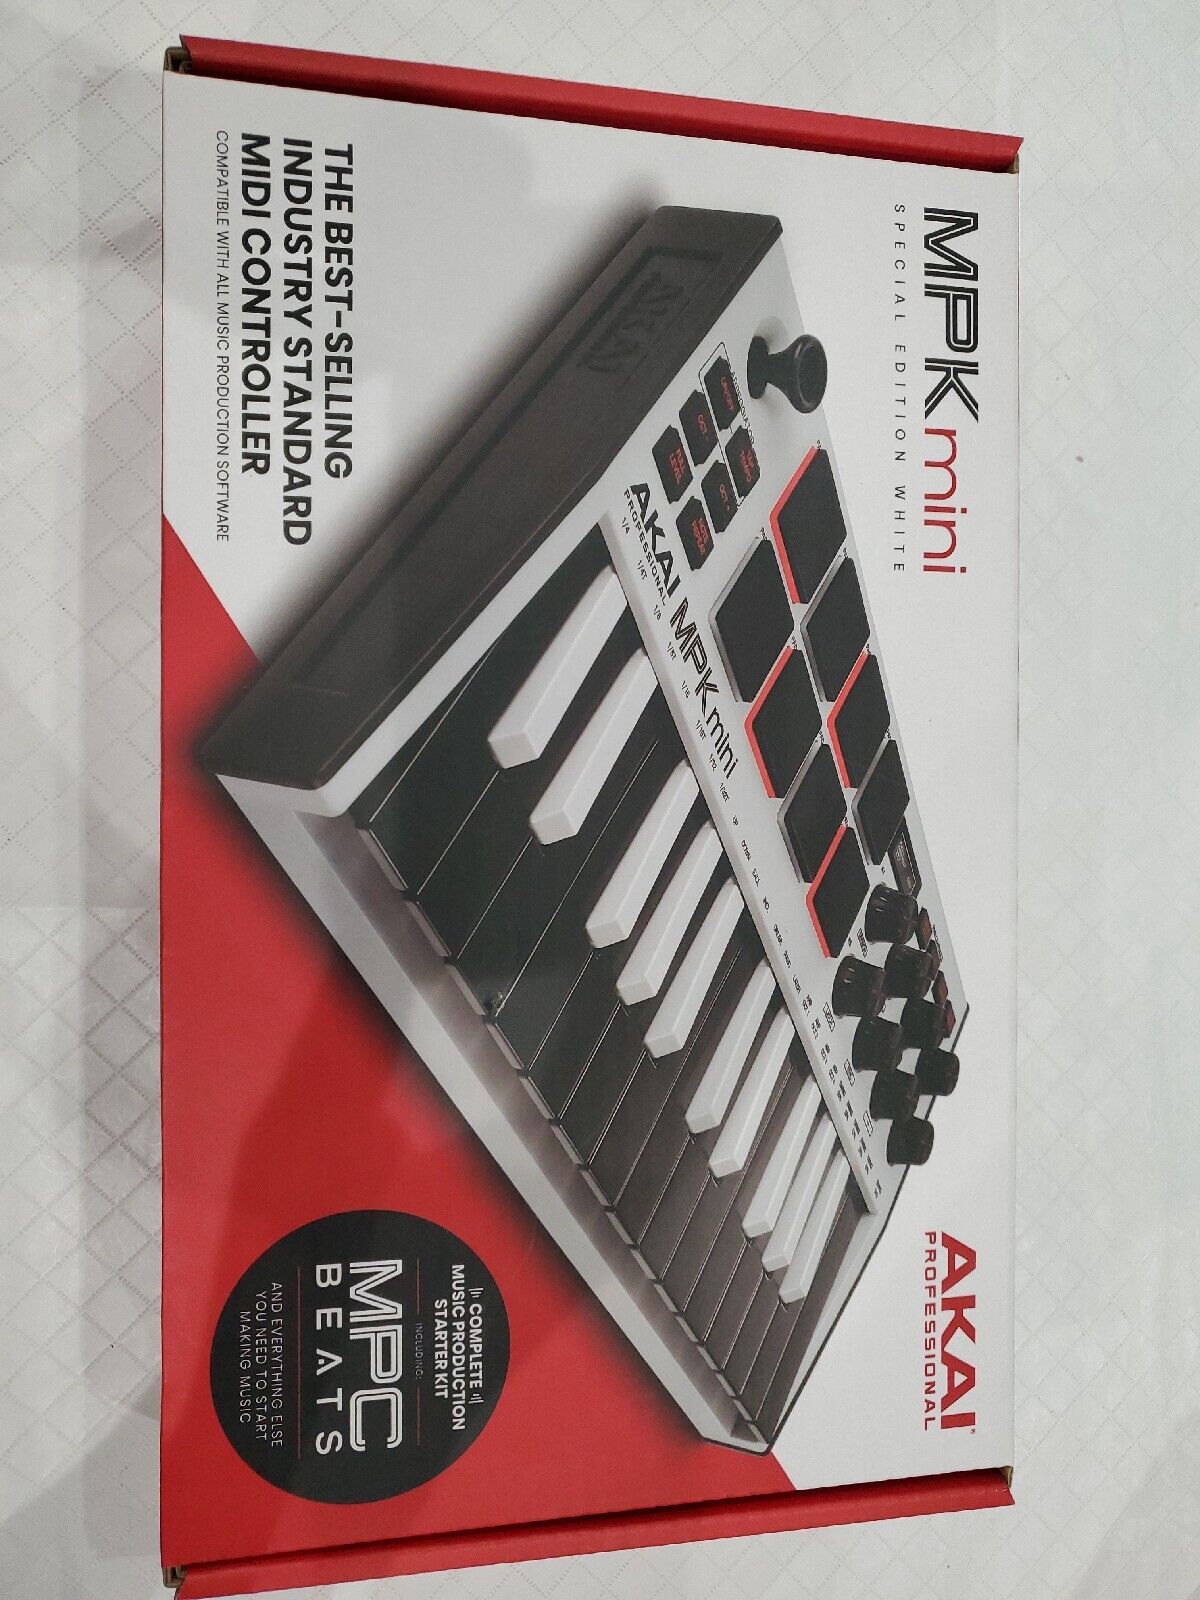 do an experiment Dated Transition Akai MPK Mini MK3 Keyboard and Pad Controller for sale online | eBay